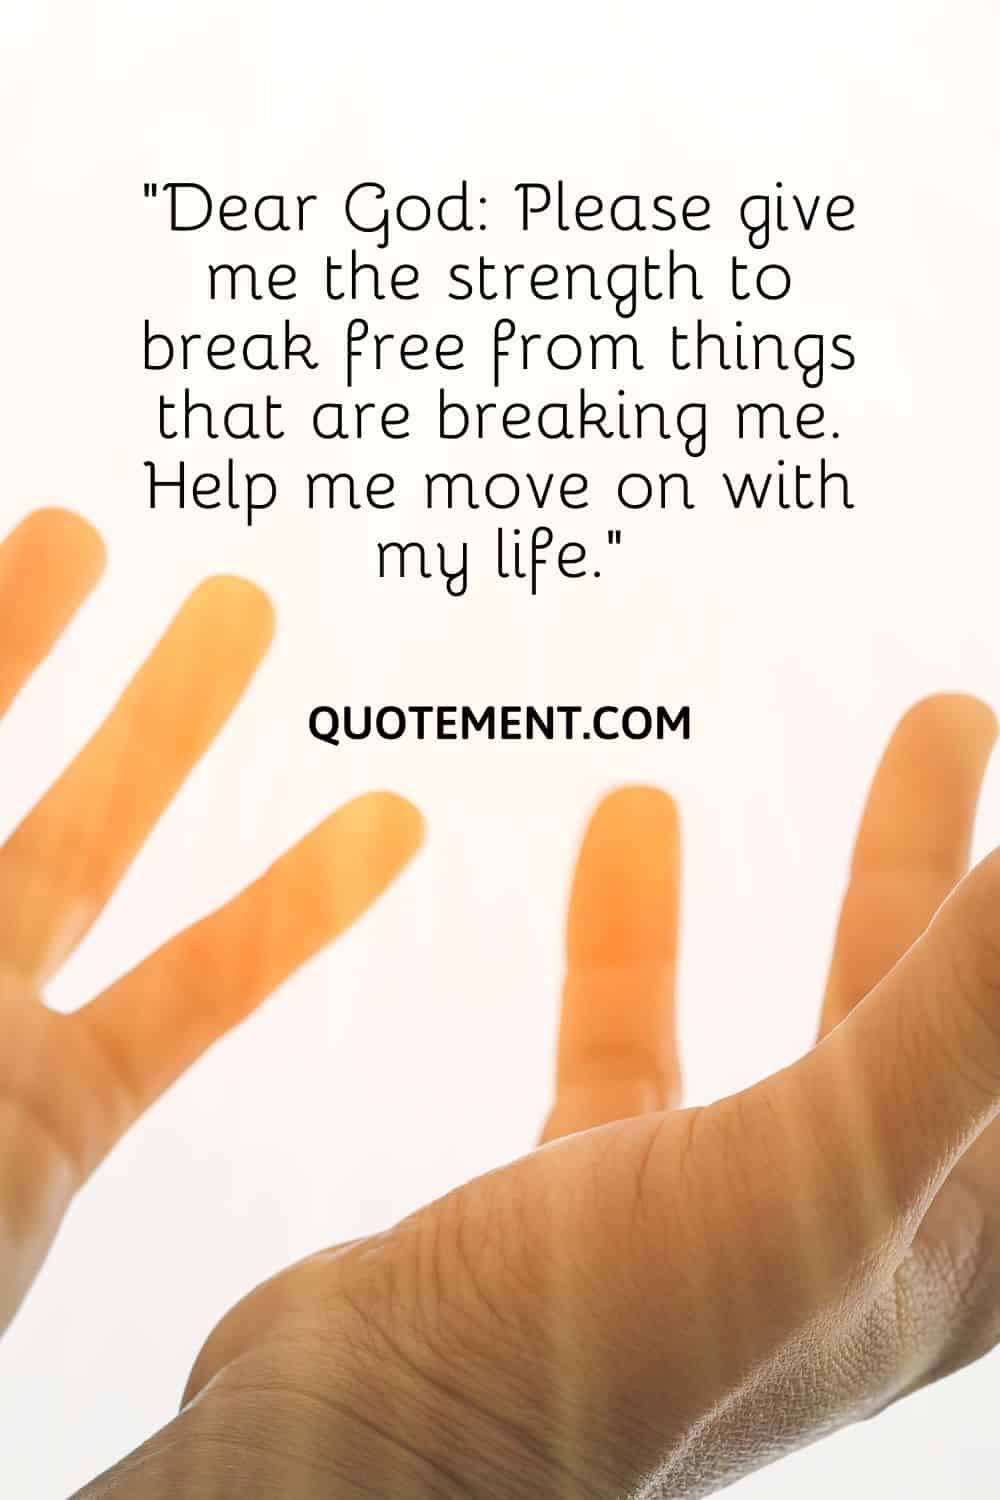 “Dear God Please give me the strength to break free from things that are breaking me. Help me move on with my life.”